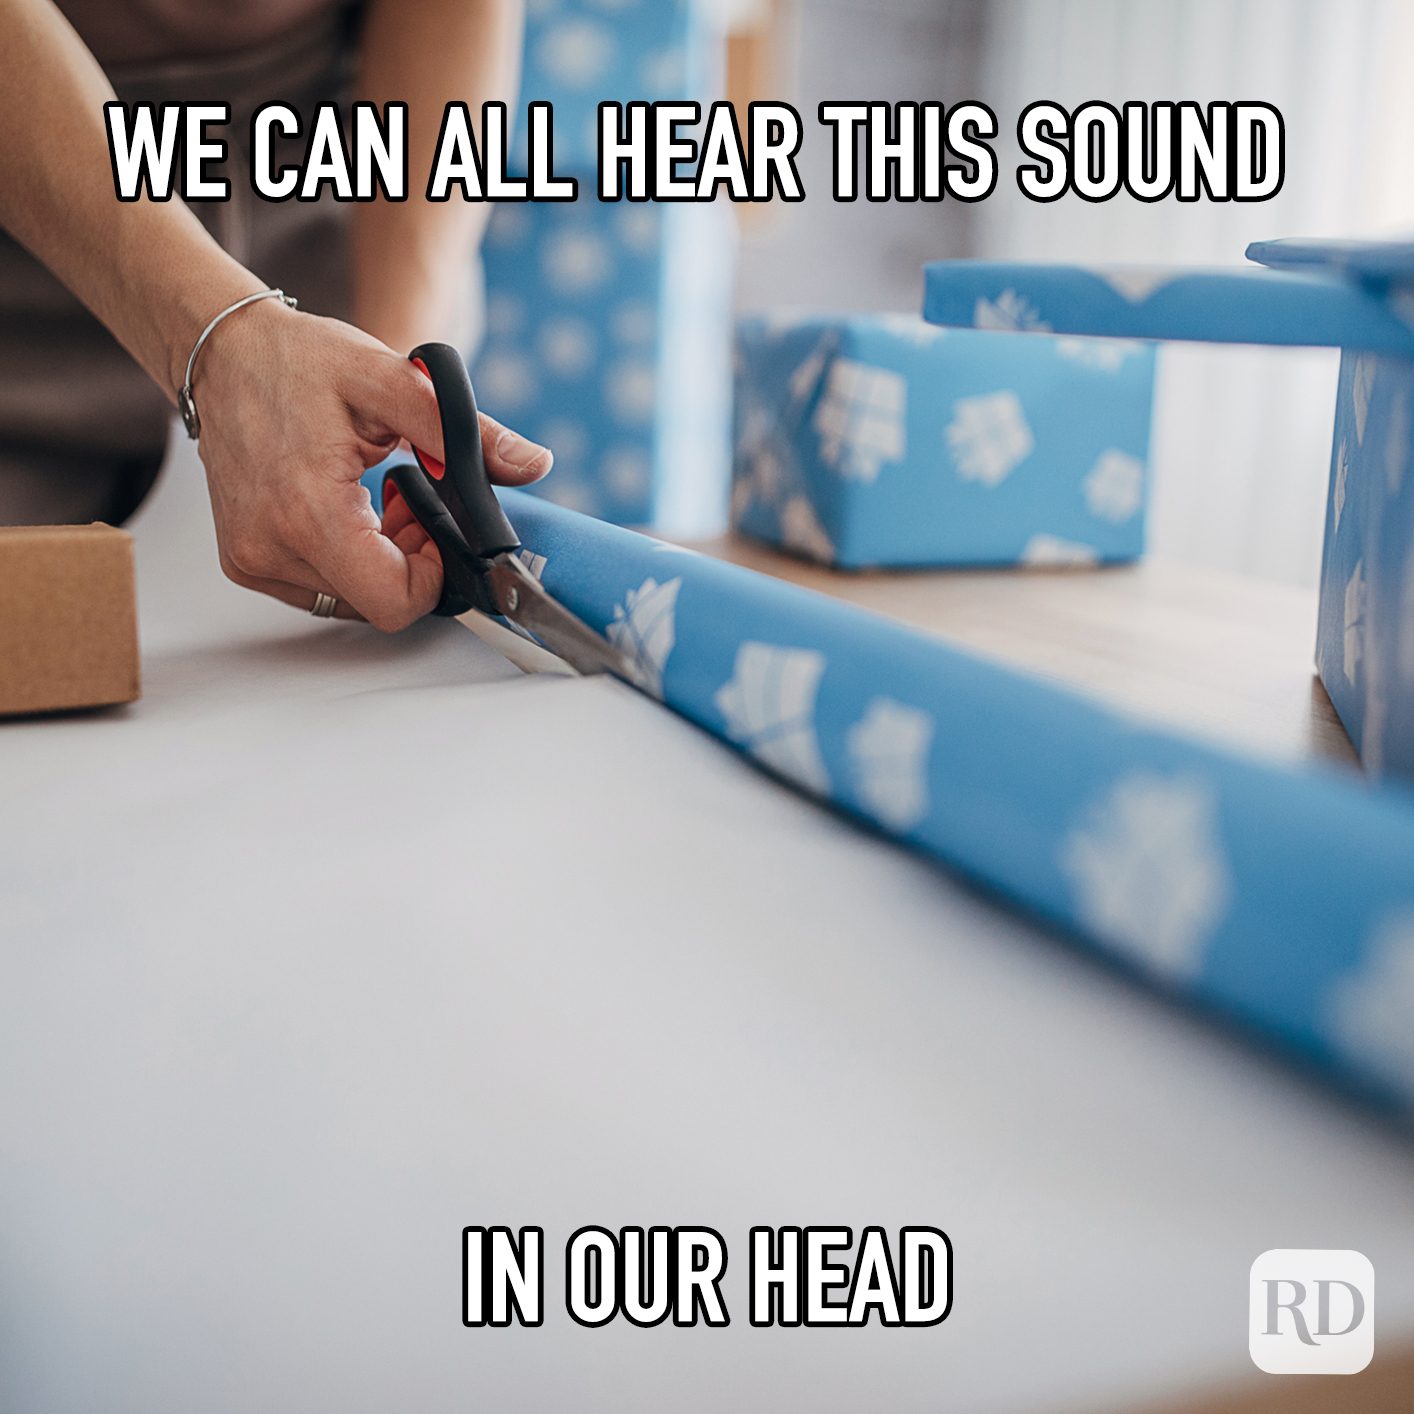 we-can-all-hear-this-sound-in-our-head.jpg